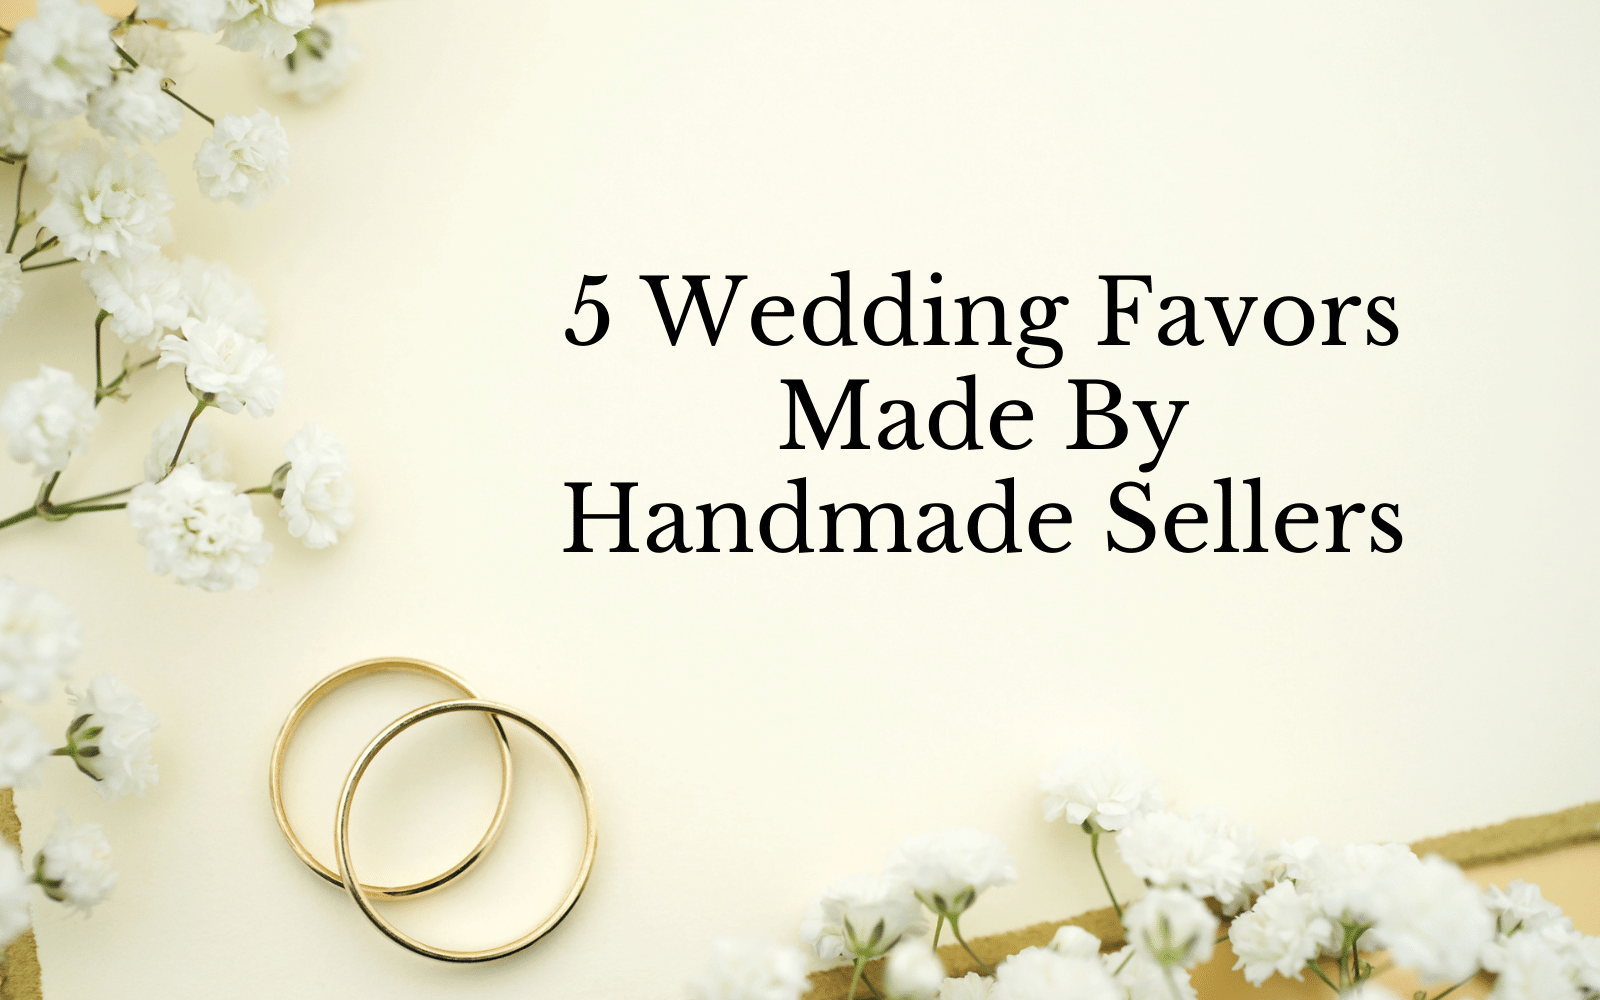 5 Wedding Favors Made By Handmade Sellers